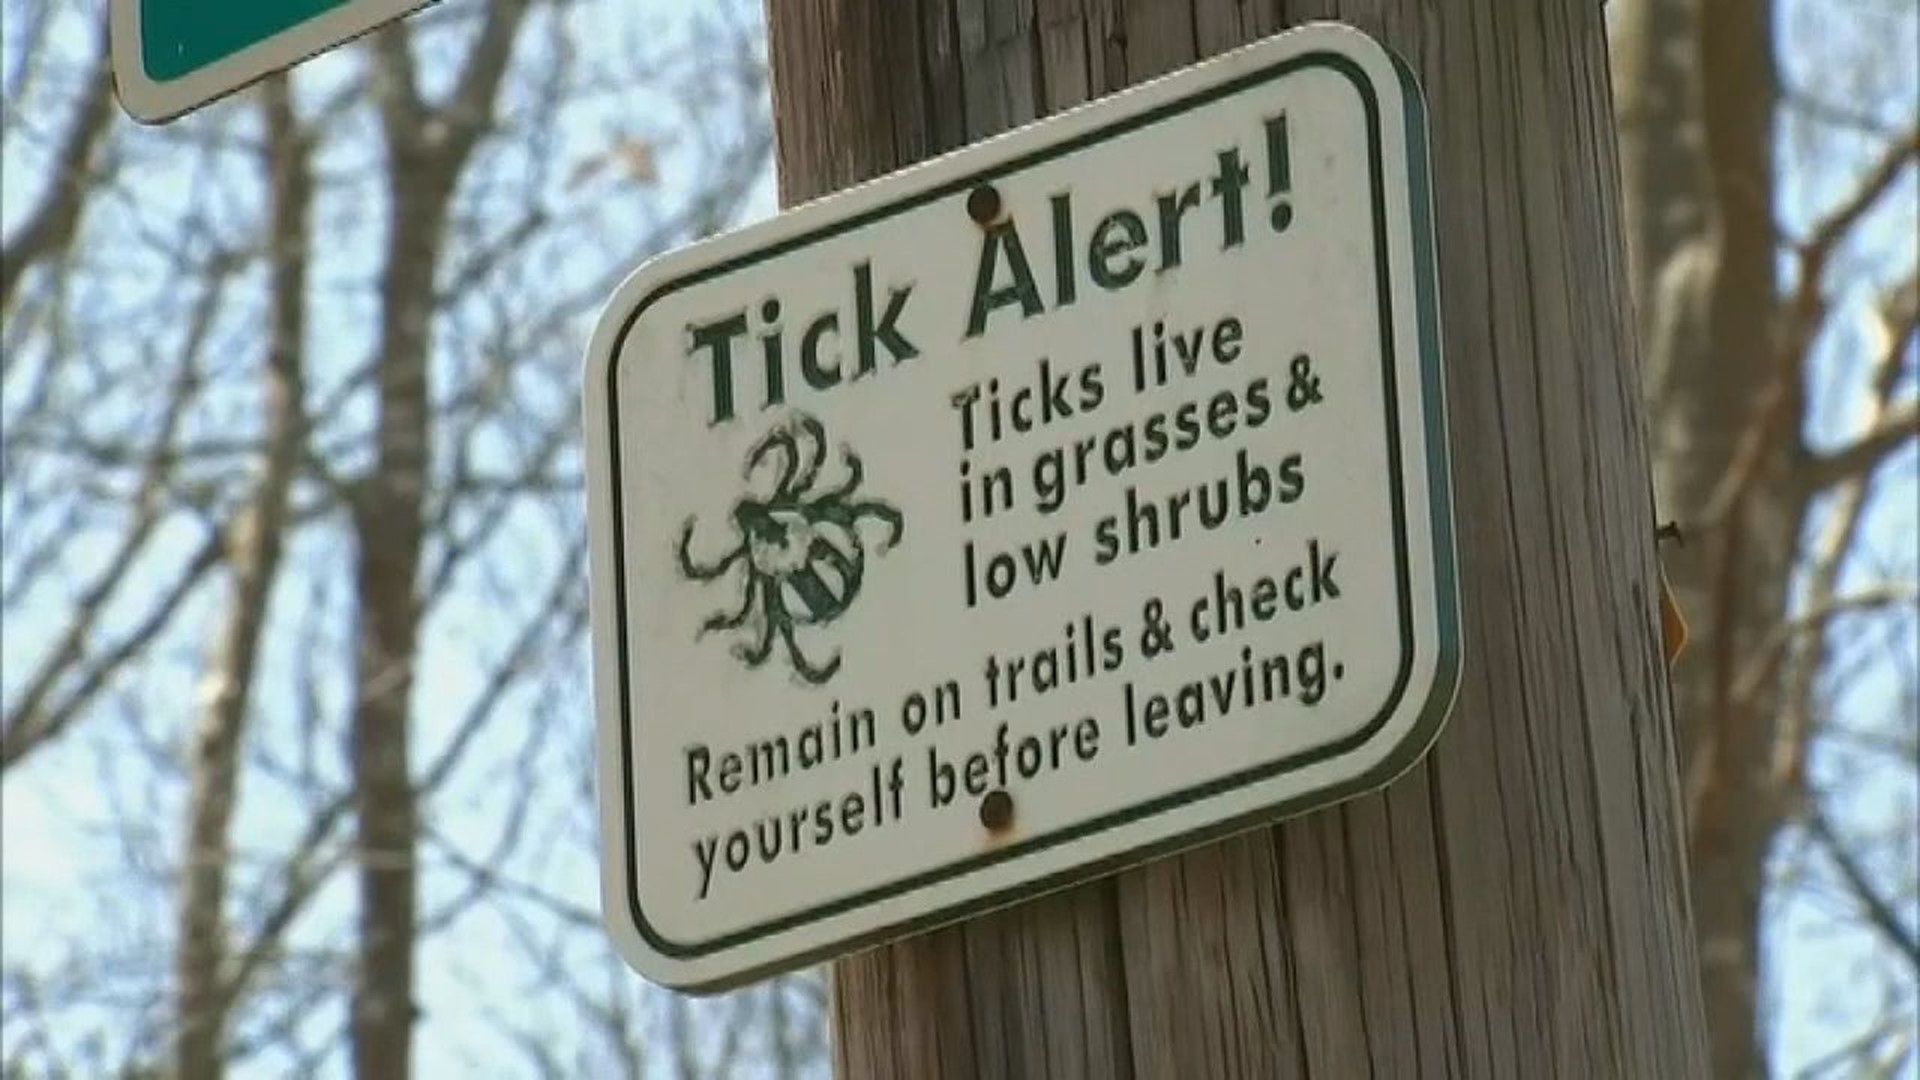 An infectious disease specialist with UMPC Susquehanna offers tips on this year's tick season and how it relates to COVID-19.